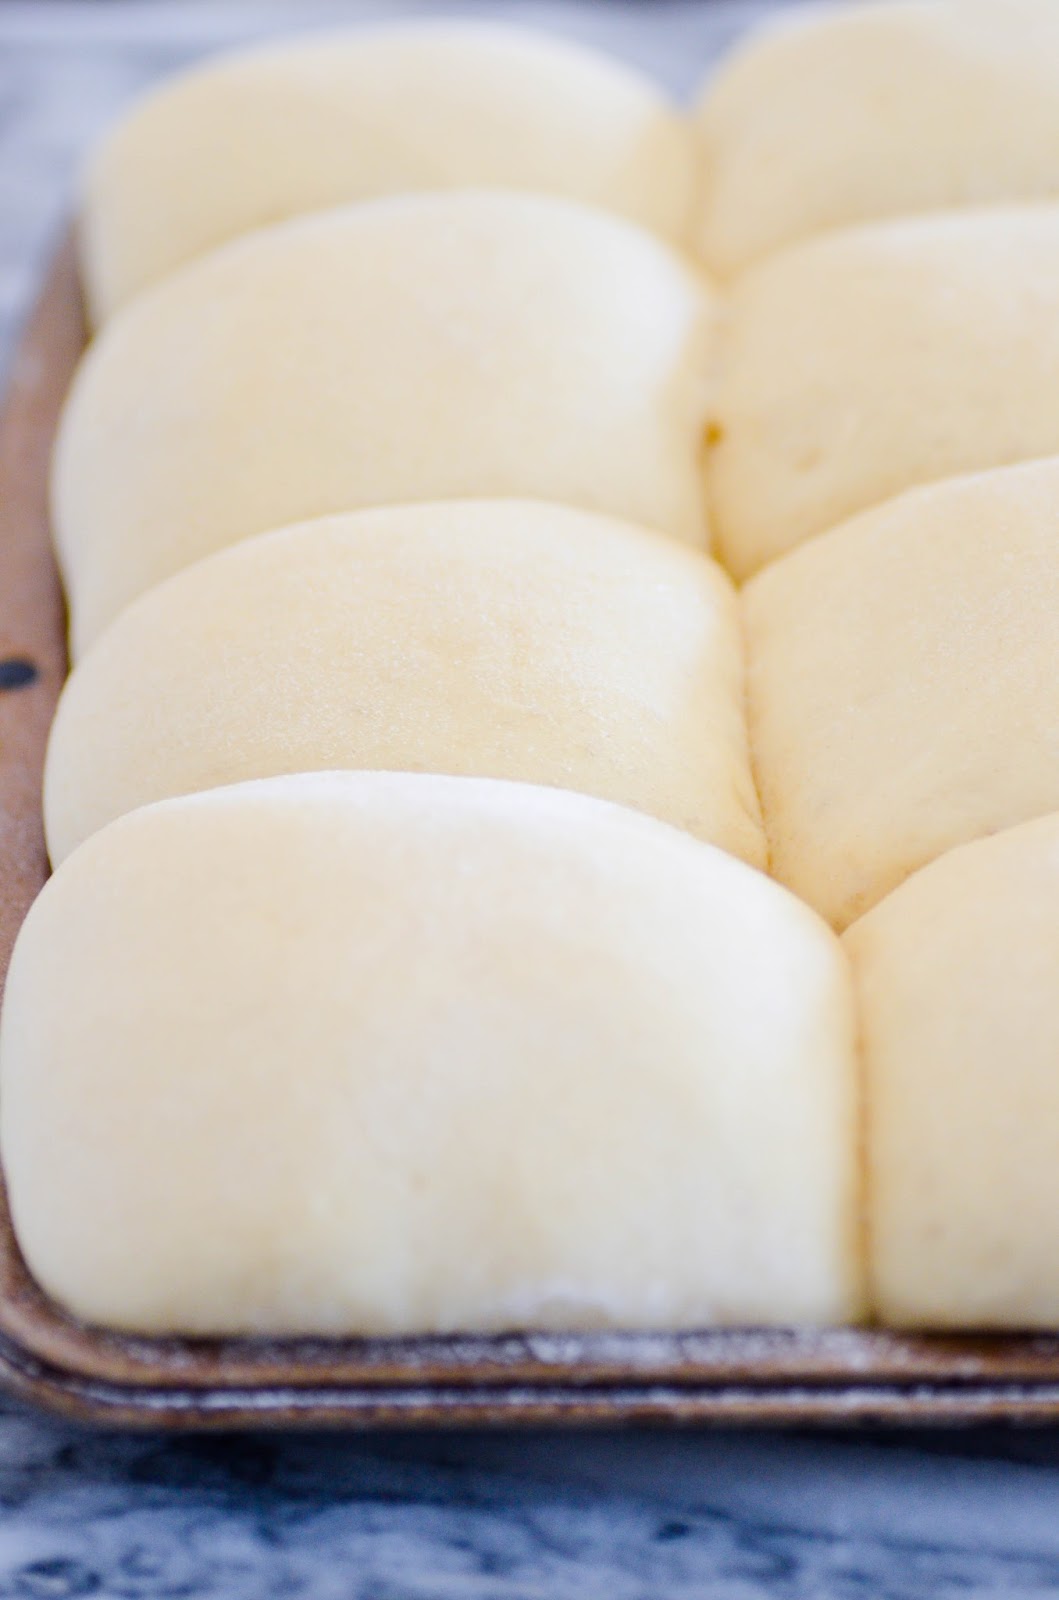 These dinner rolls were perfectly golden on top and pillow soft in the middle. Plus, this recipe makes a BIG batch, which I think is a must in a dinner roll recipe!